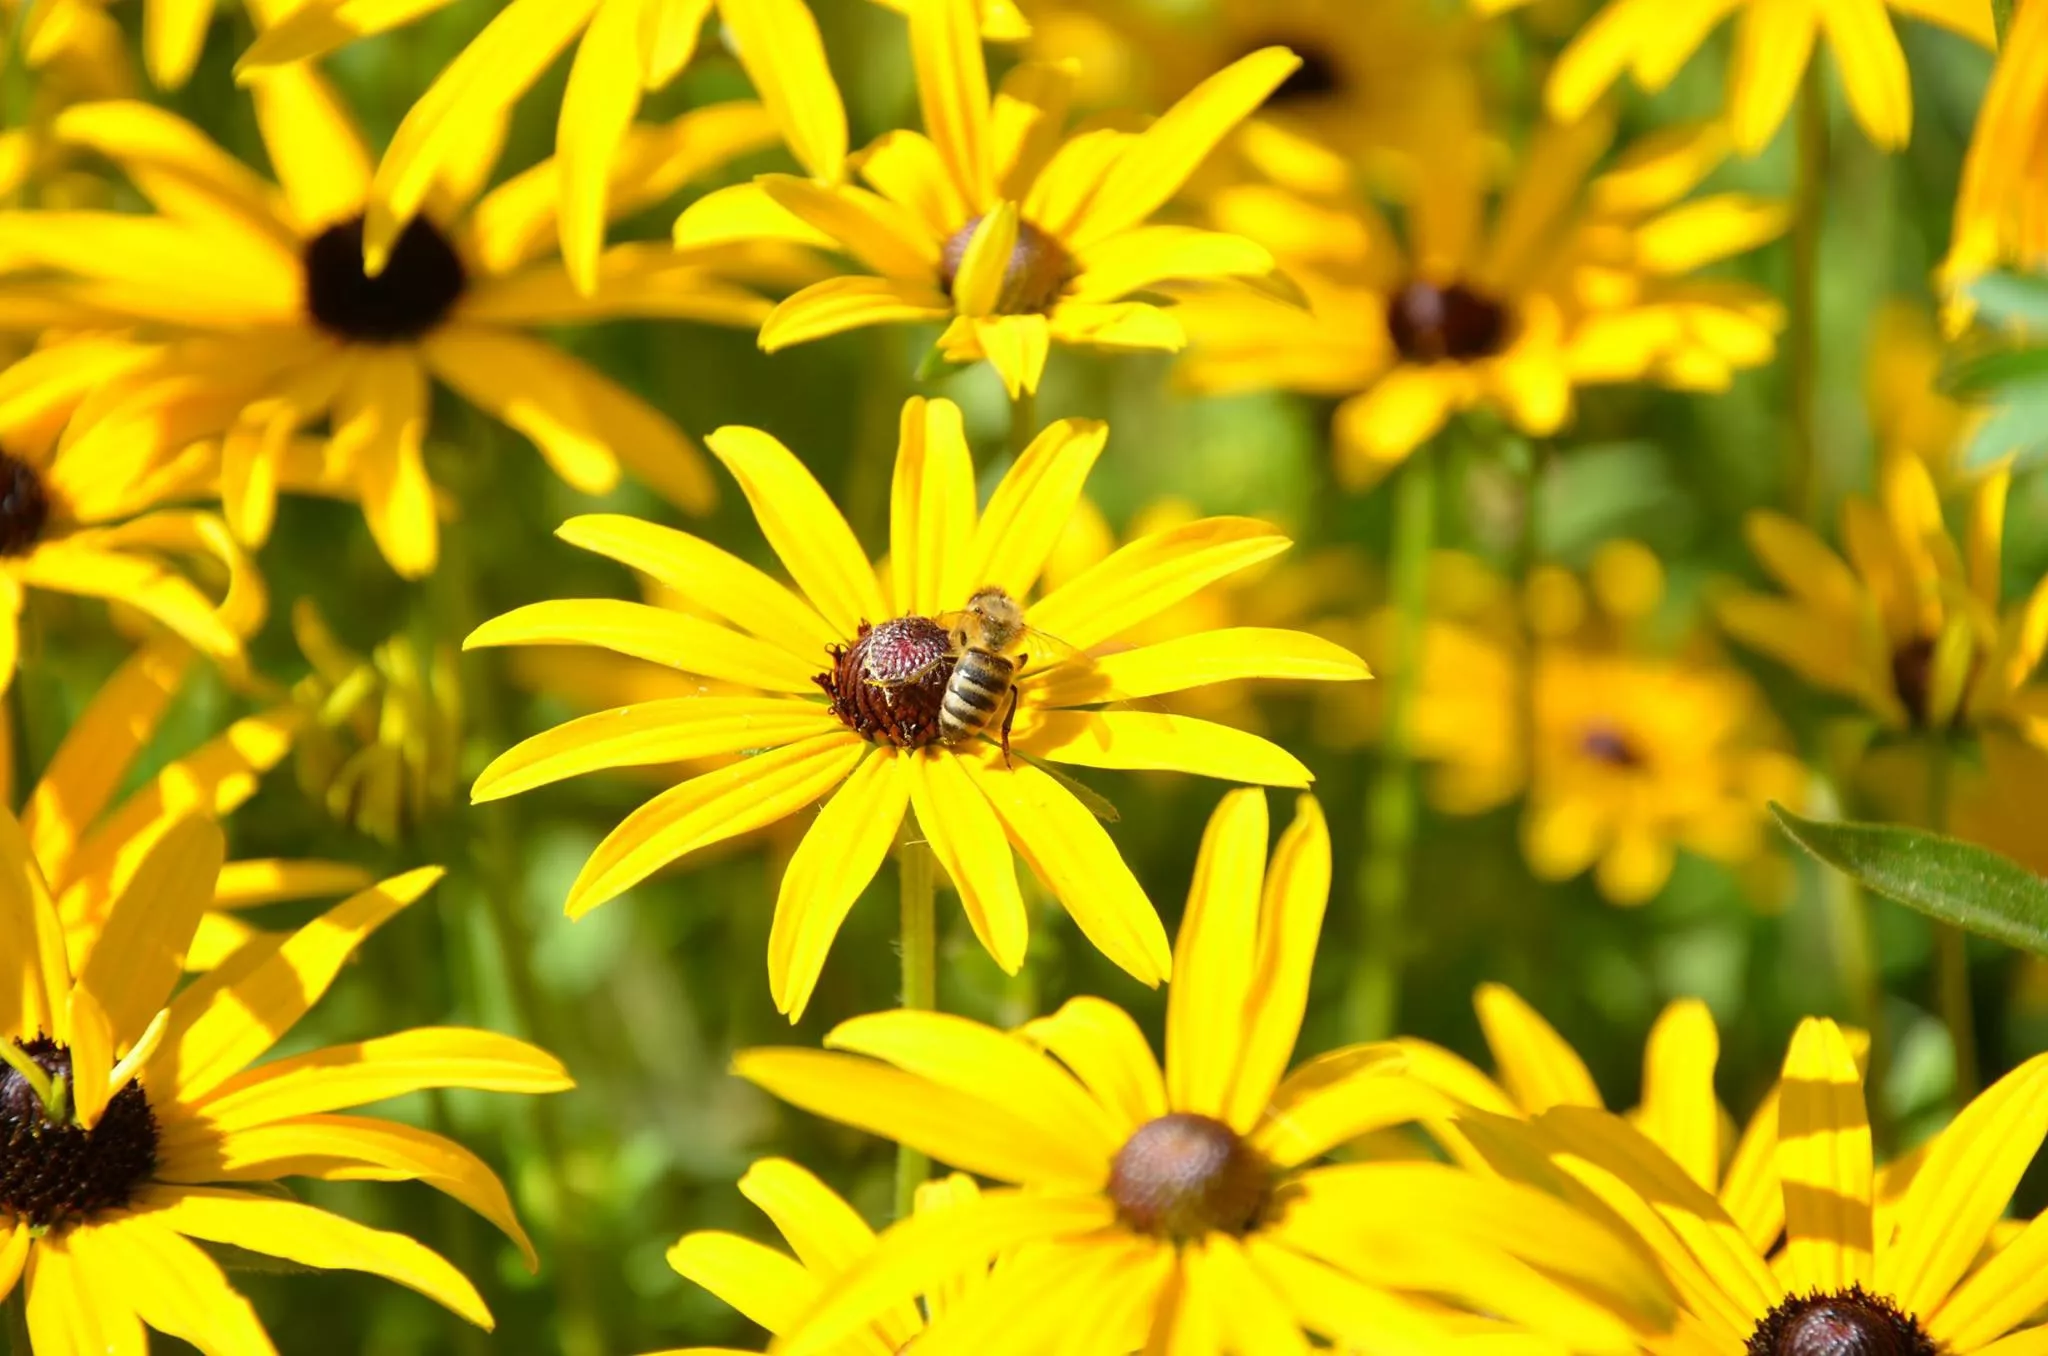 Field of black-eyed Susans with bee on one